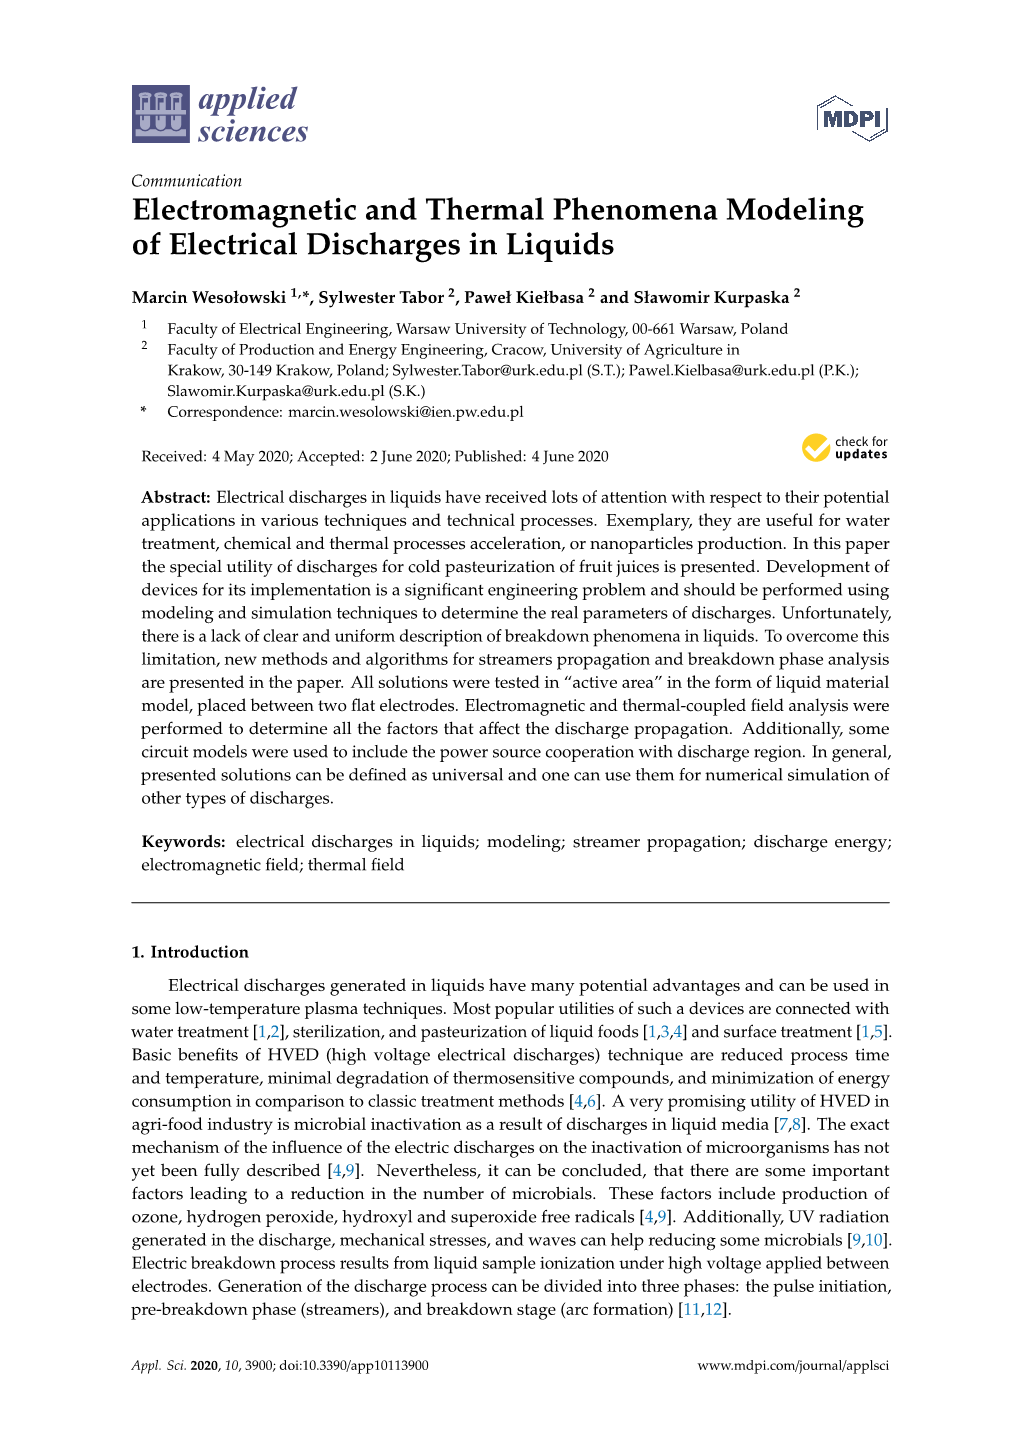 Electromagnetic and Thermal Phenomena Modeling of Electrical Discharges in Liquids